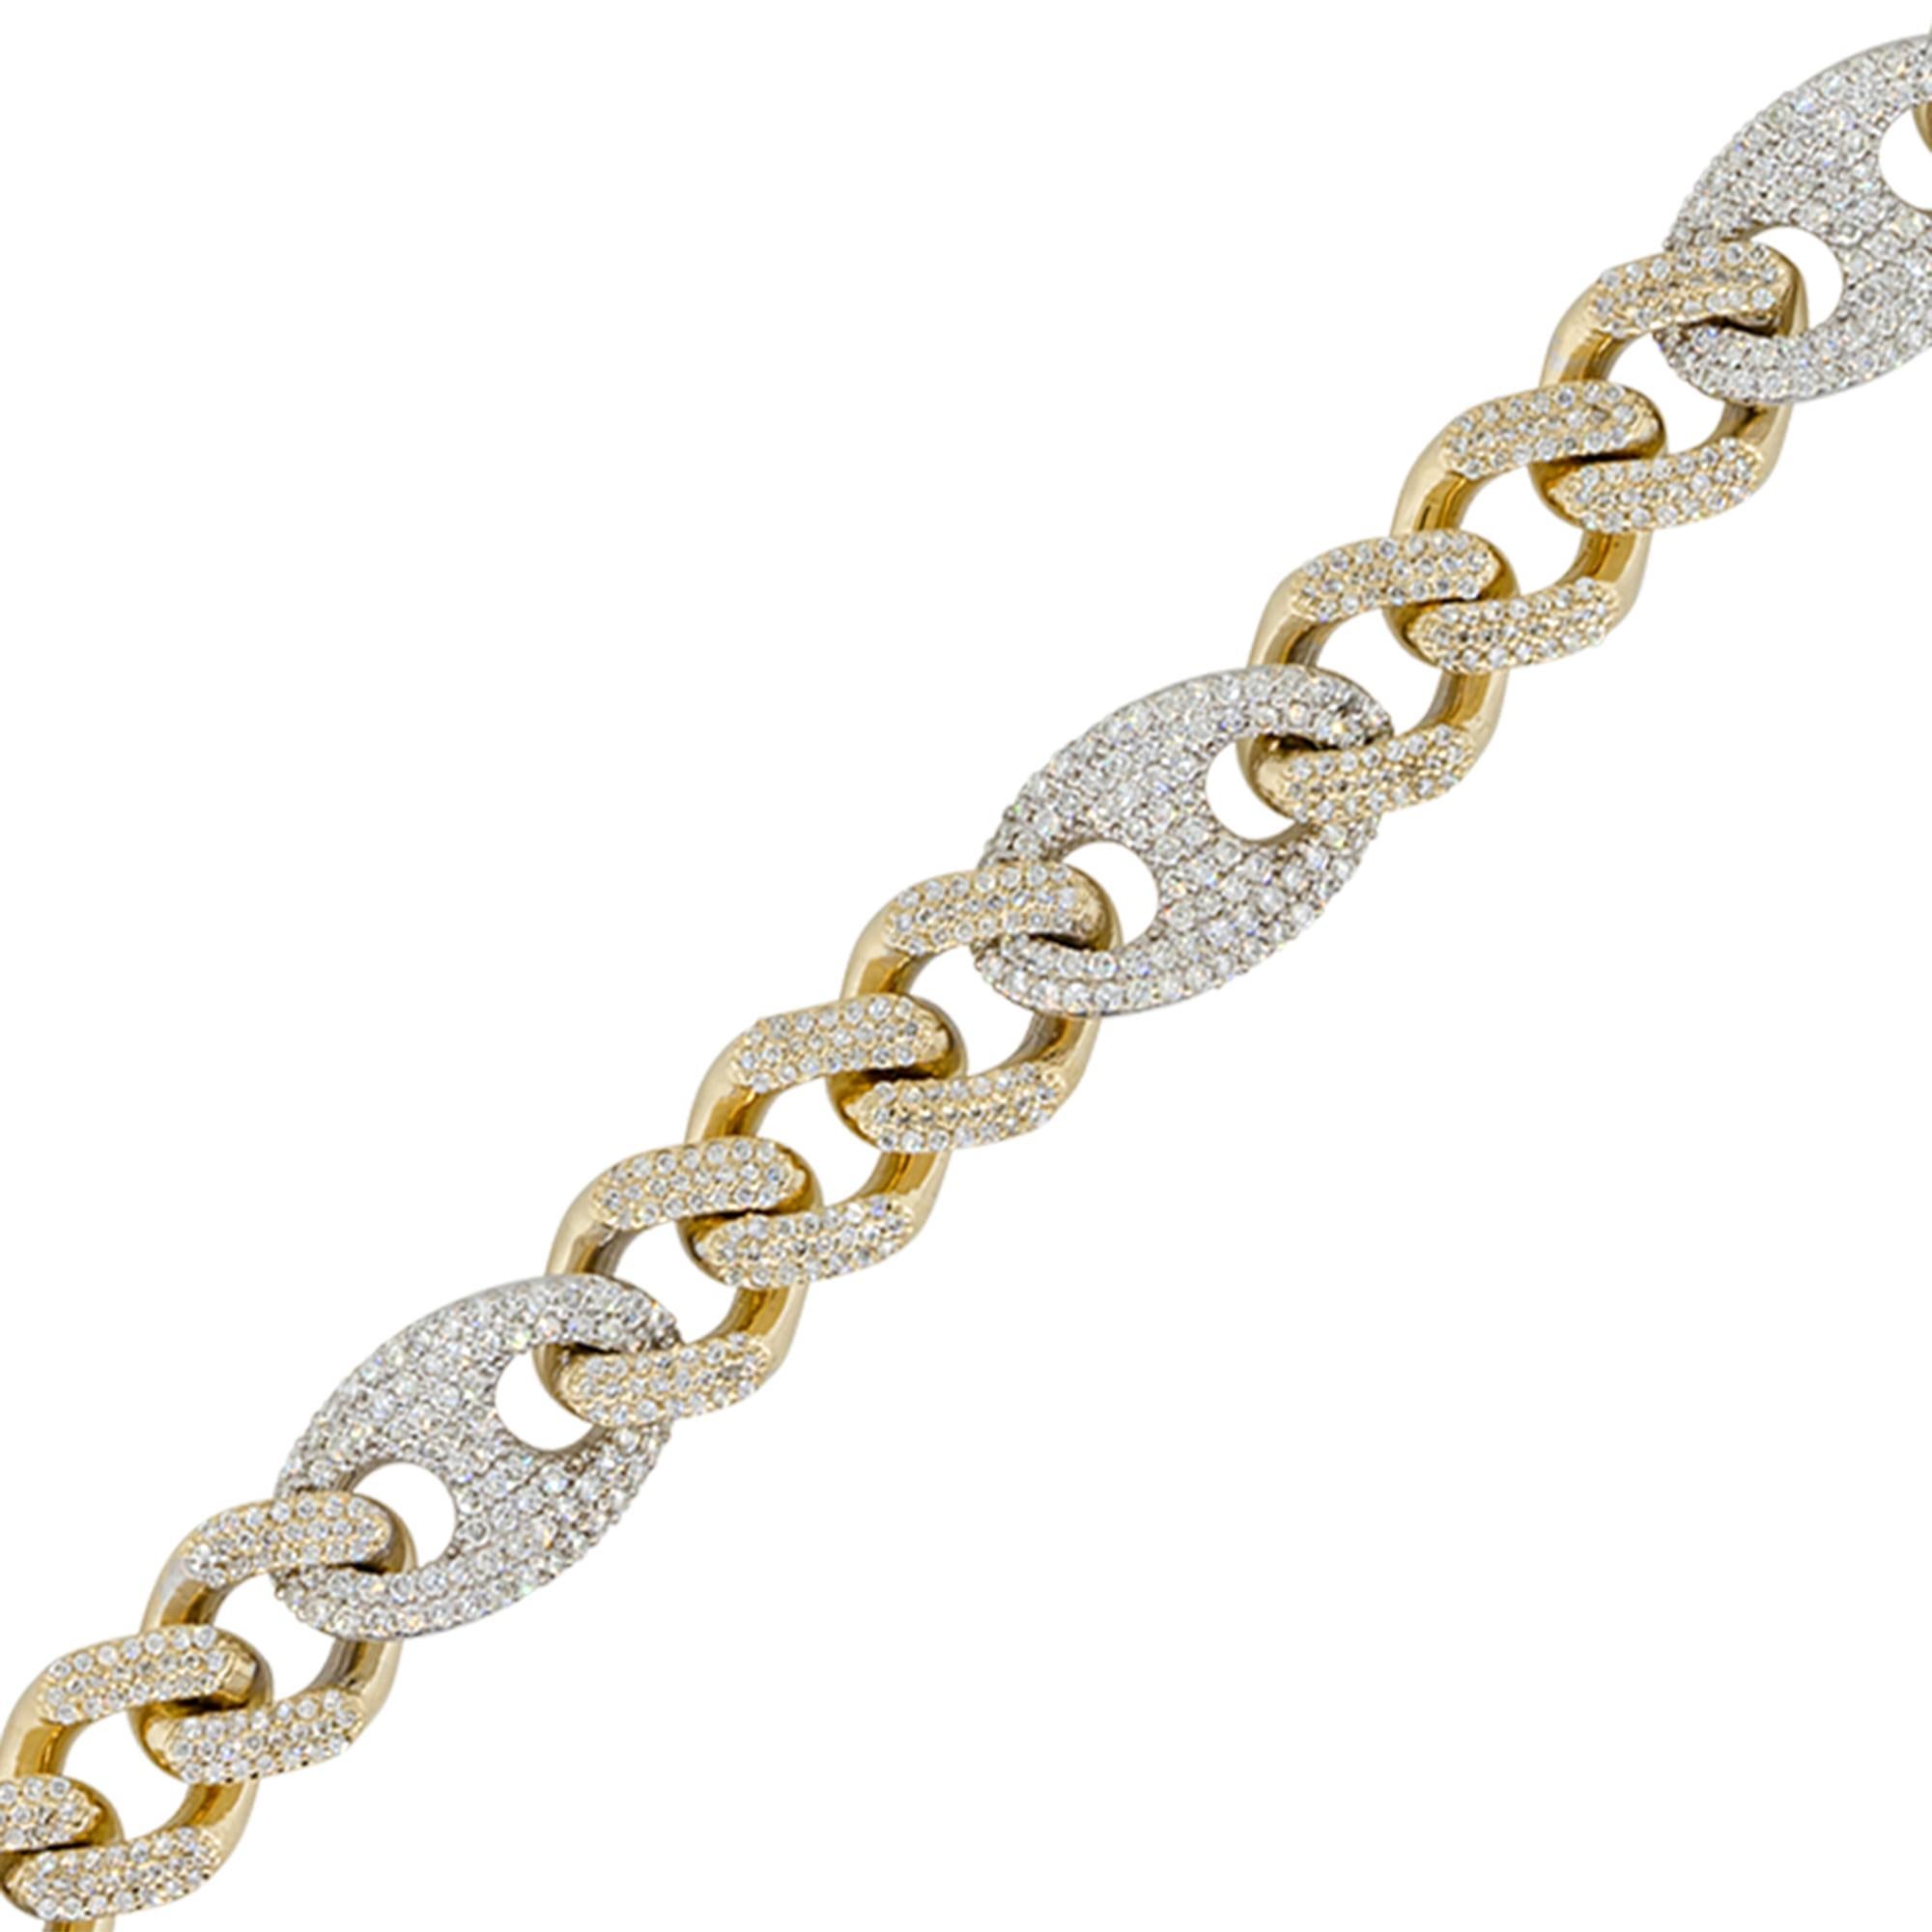 Material: 18k White gold
Diamond details: Approx. 7.55ctw of round cut diamonds. Diamonds are G/H in color and VS in clarity
Clasps: Tongue in box
Total Weight: 71.8g (46.2dwt)
Bracelet measurements: 9